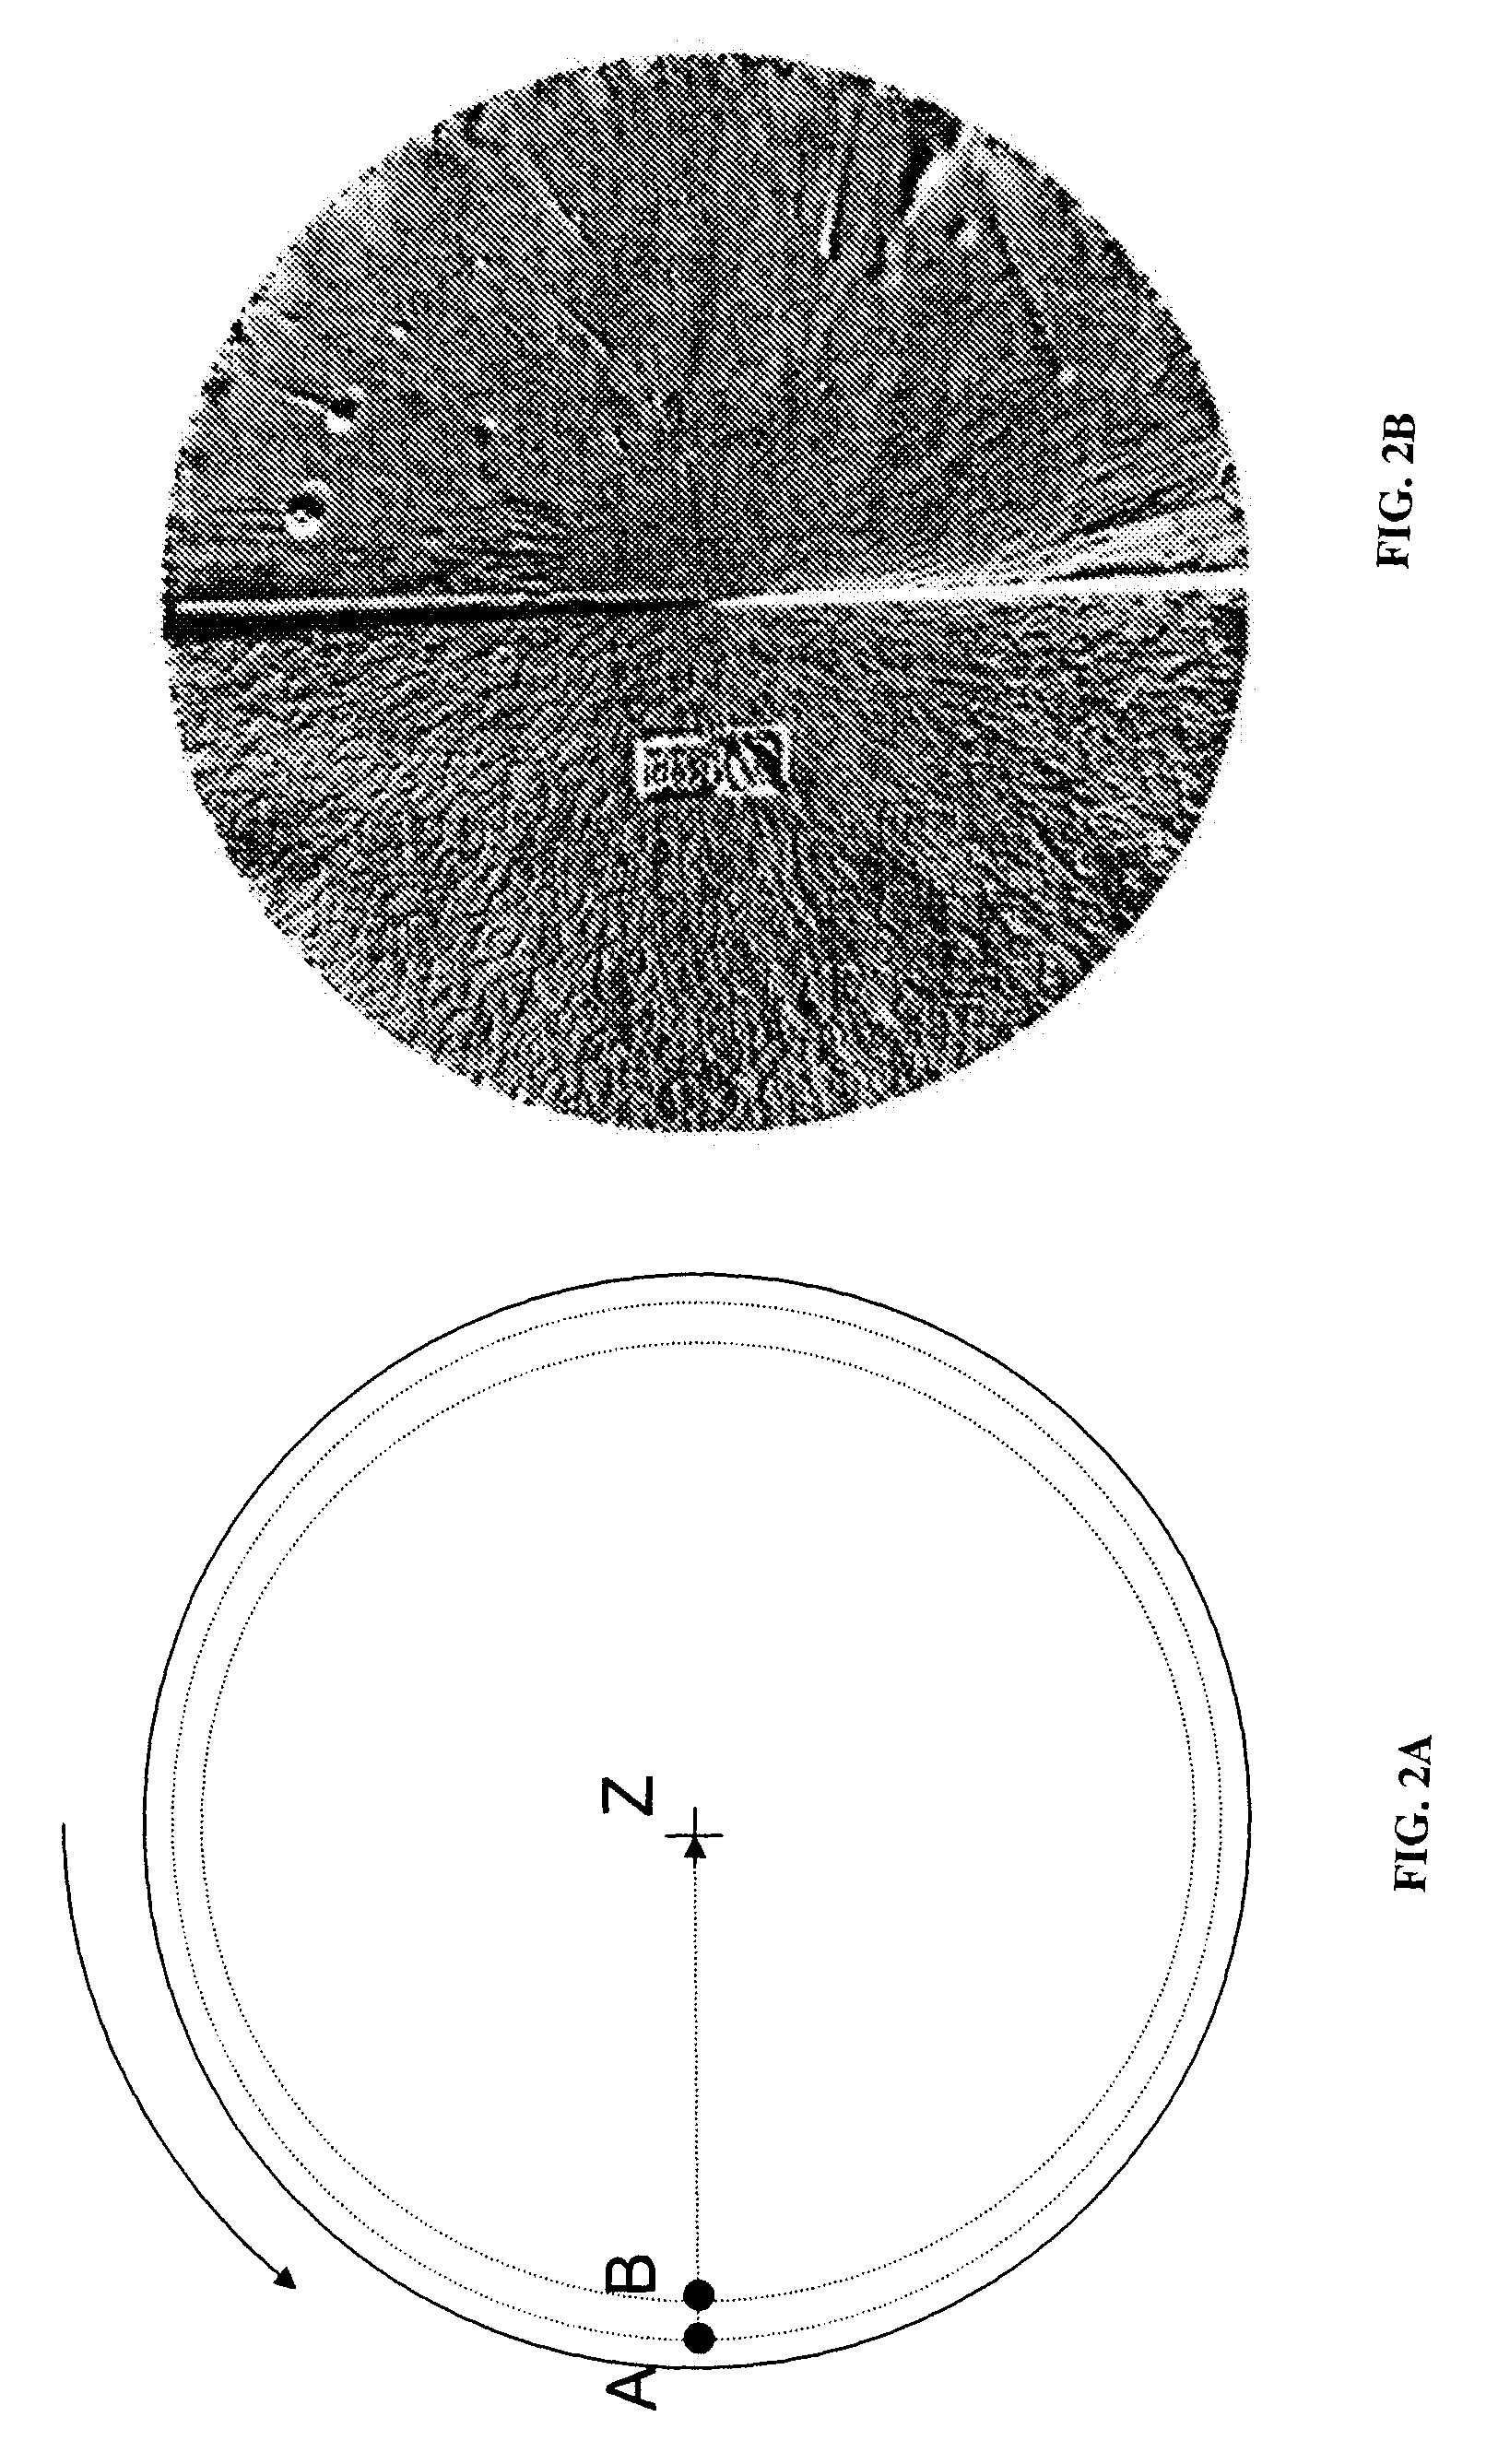 Defect classification utilizing data from a non-vibrating contact potential difference sensor